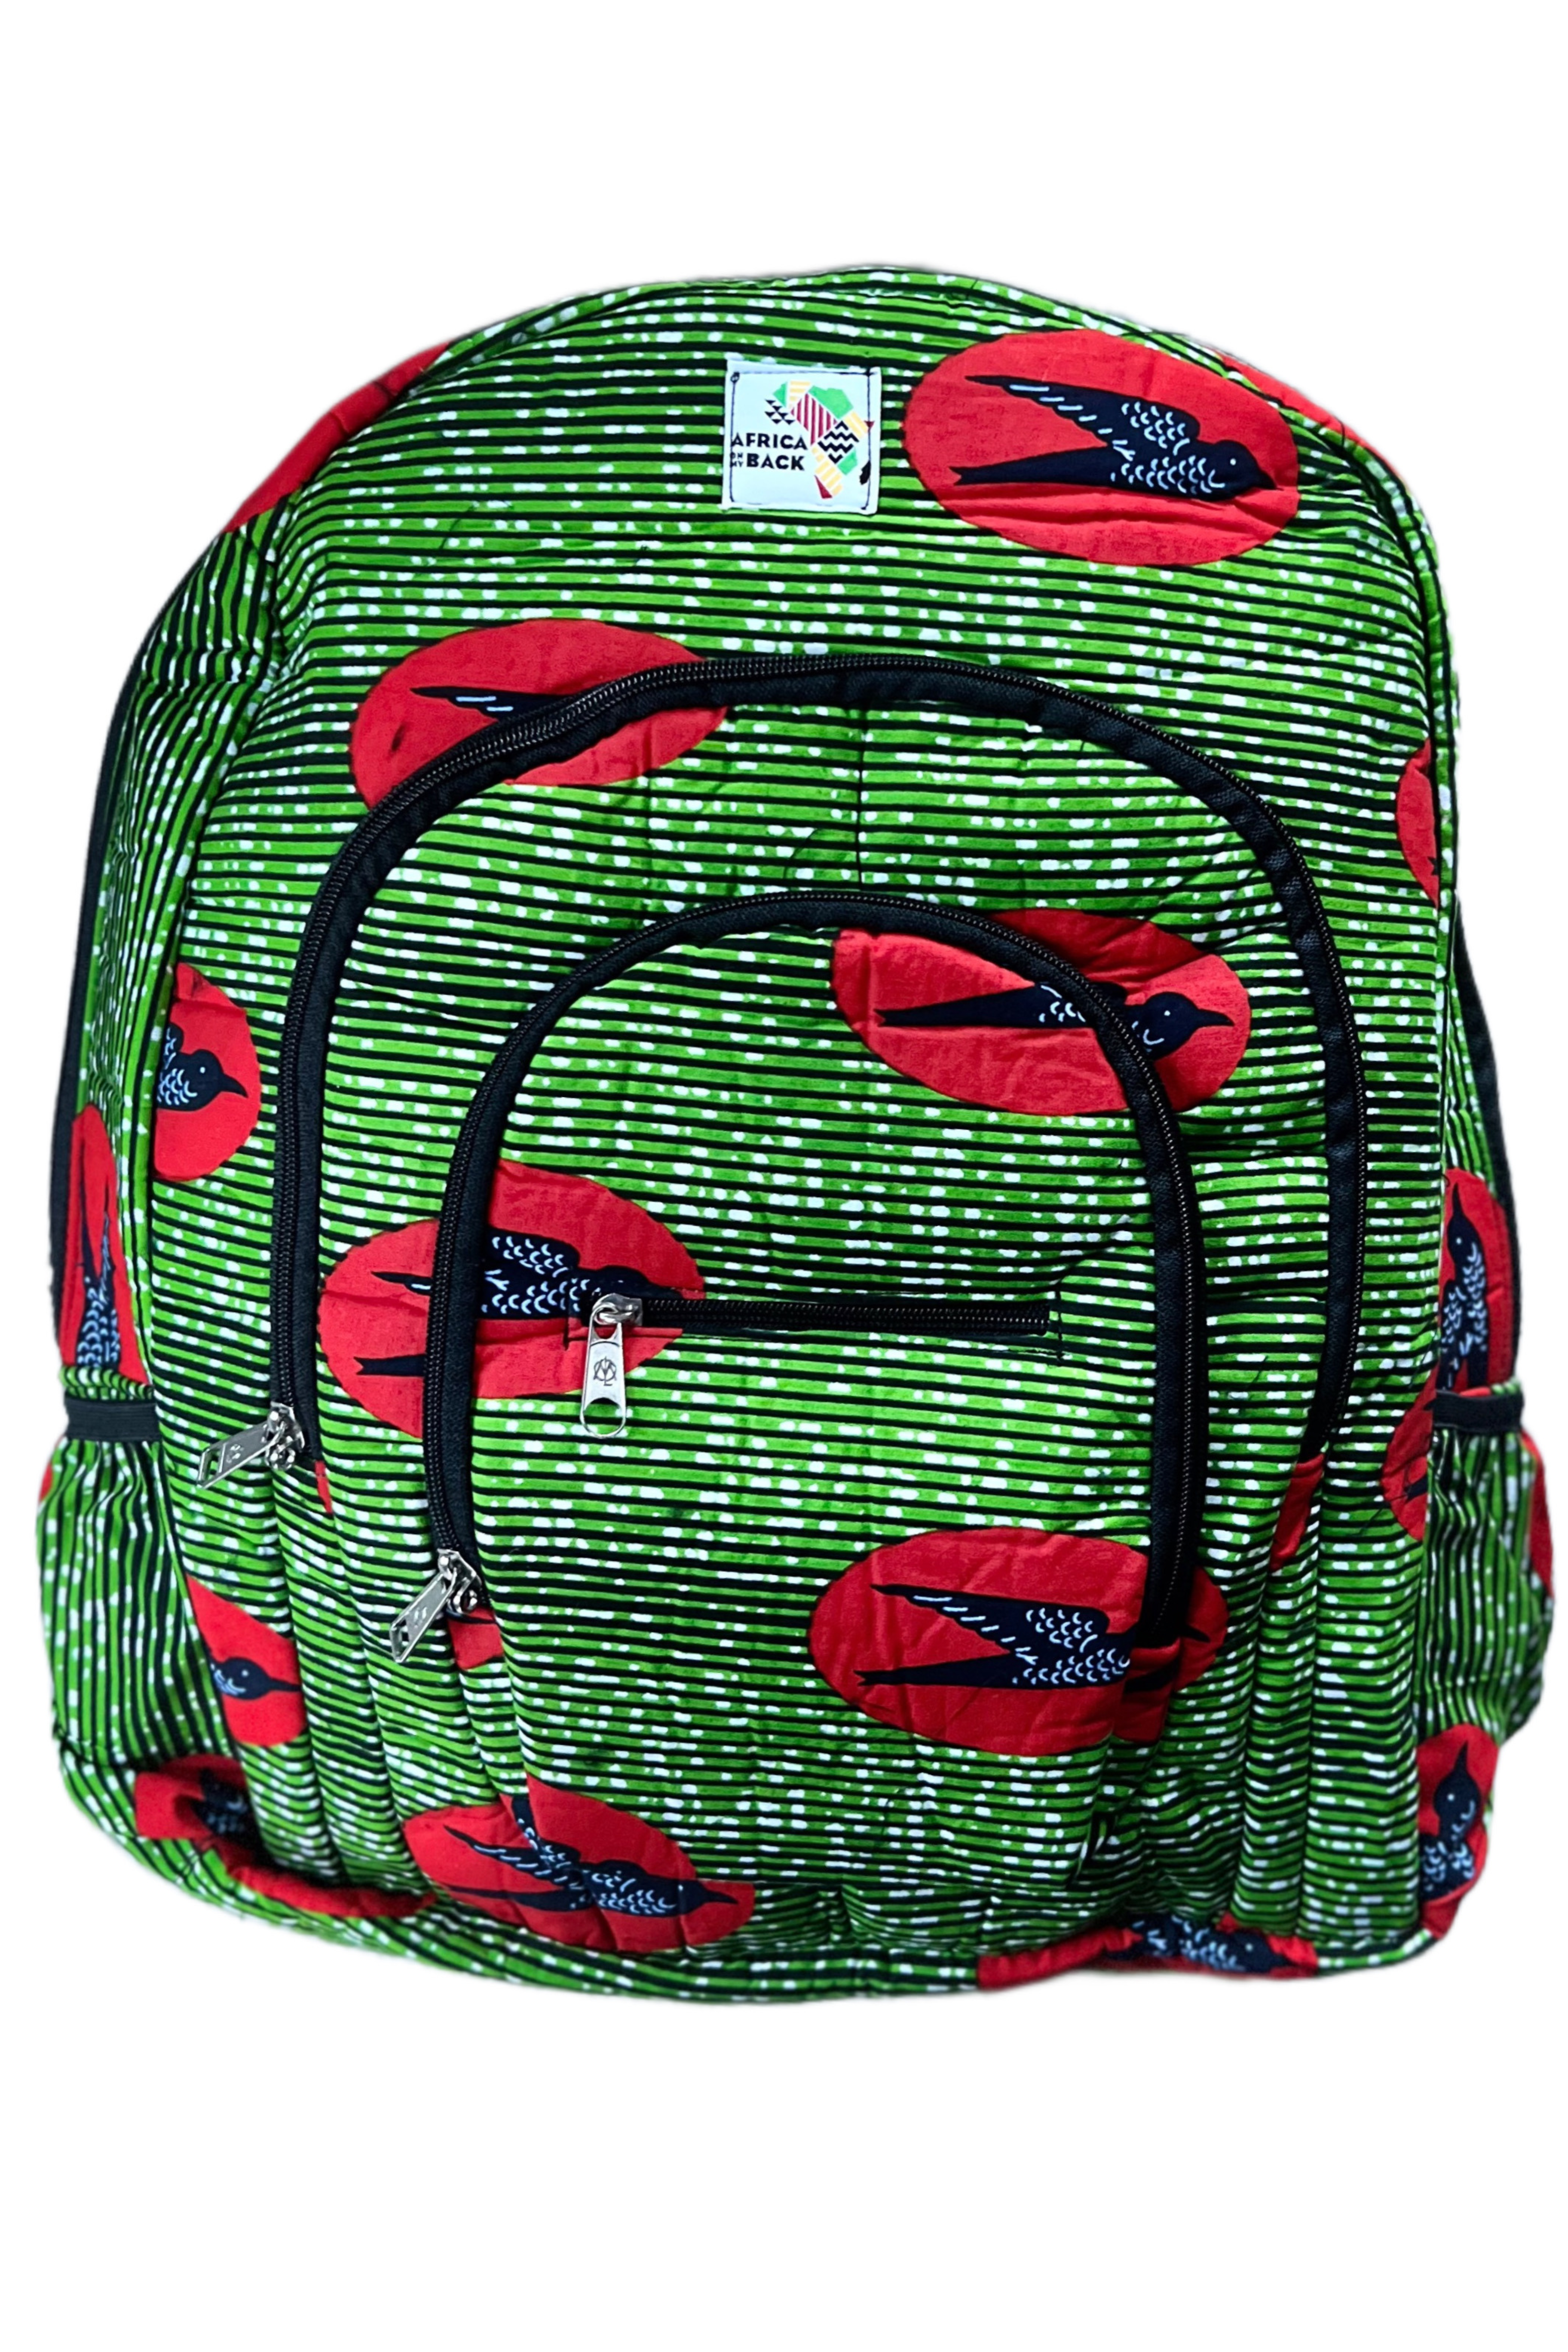 Green Rust Sika Full Size Back Pack